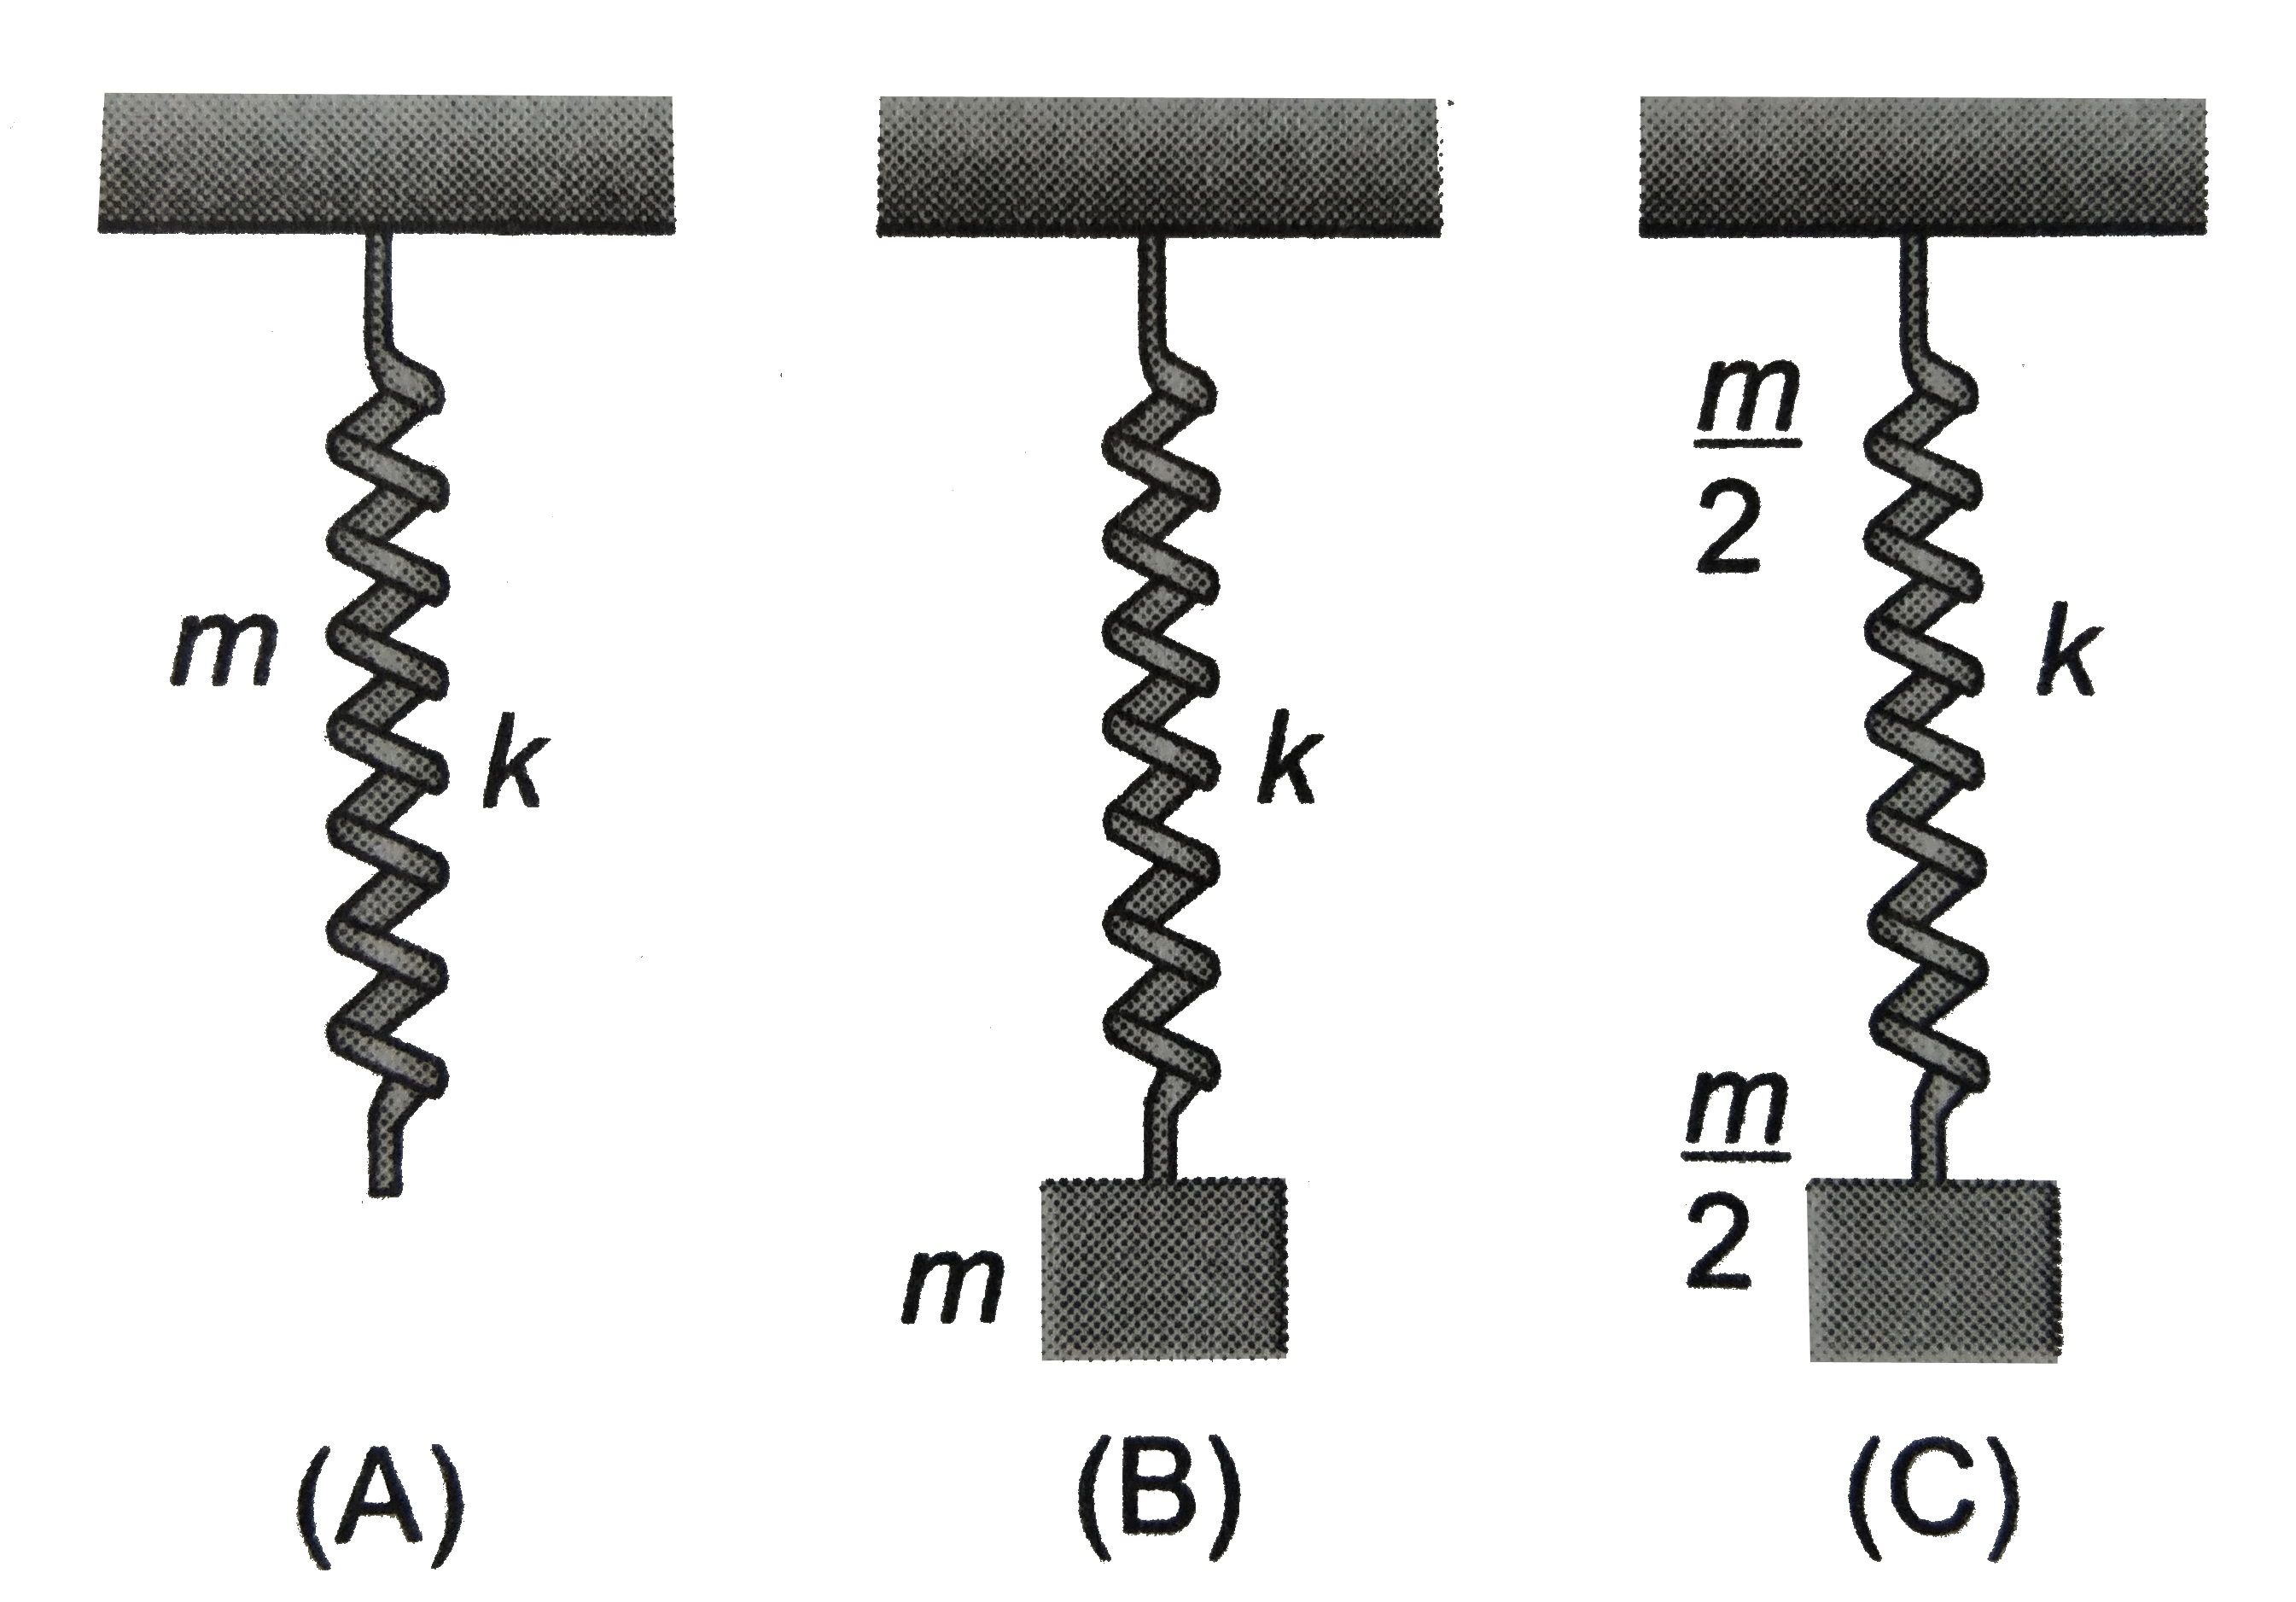 Three arrangements are shown in figure.      (a) A spring of mass m and stiffness k   (b) A block of mass m attached to massless spring of stiffness k   ( c) A block of mass (m)/(2) attached to a spring of mass (m)/(2) and stiffness k   If T(1), T(2) and T(3) represent the period of oscillation in the three cases respectively, then identify the correct relation.